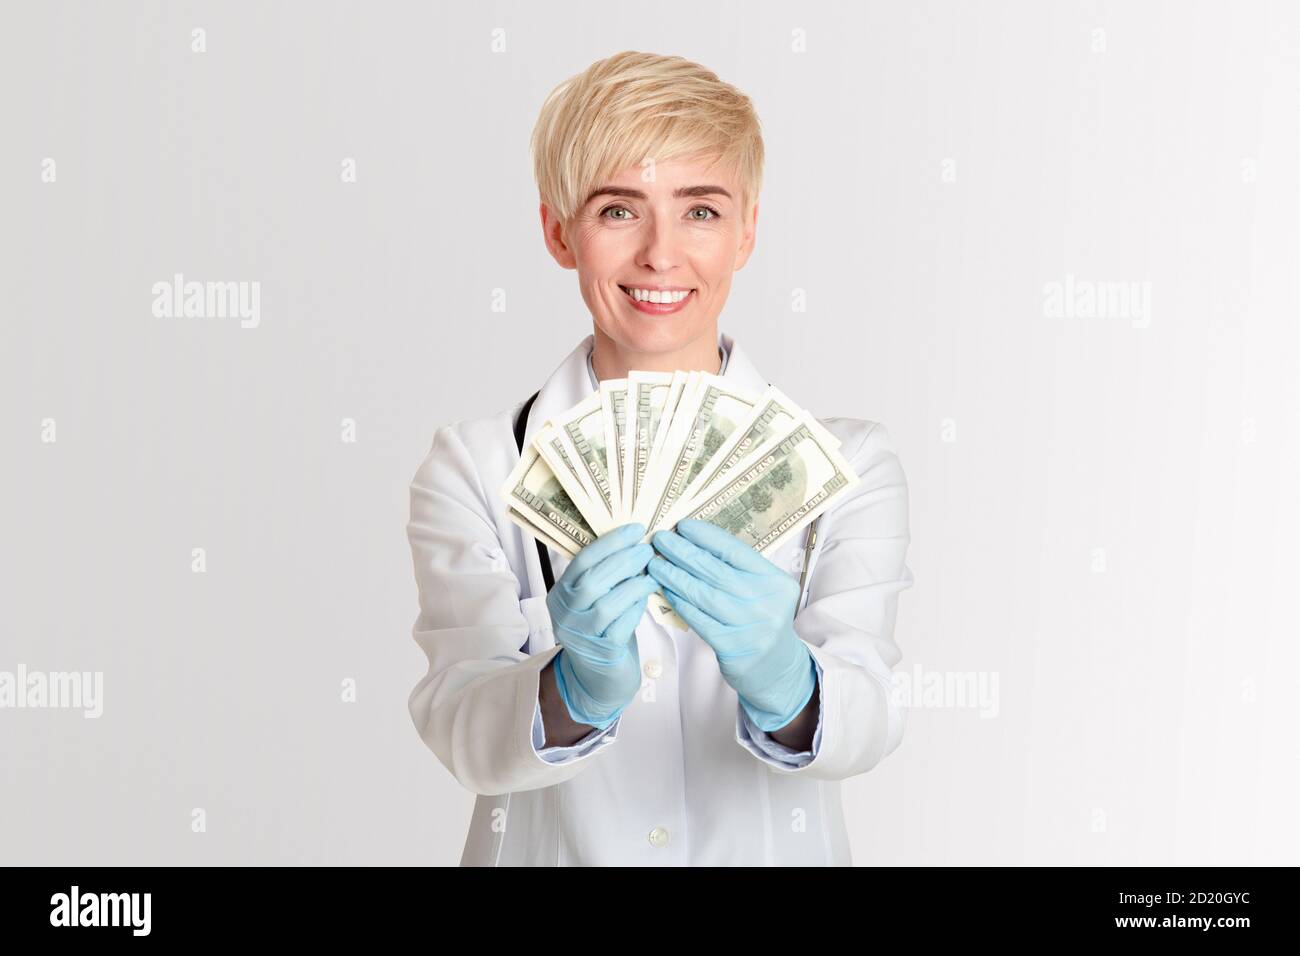 Corruption of medical system. Happy female doctor in white coat and rubber gloves received money and shows dollars Stock Photo